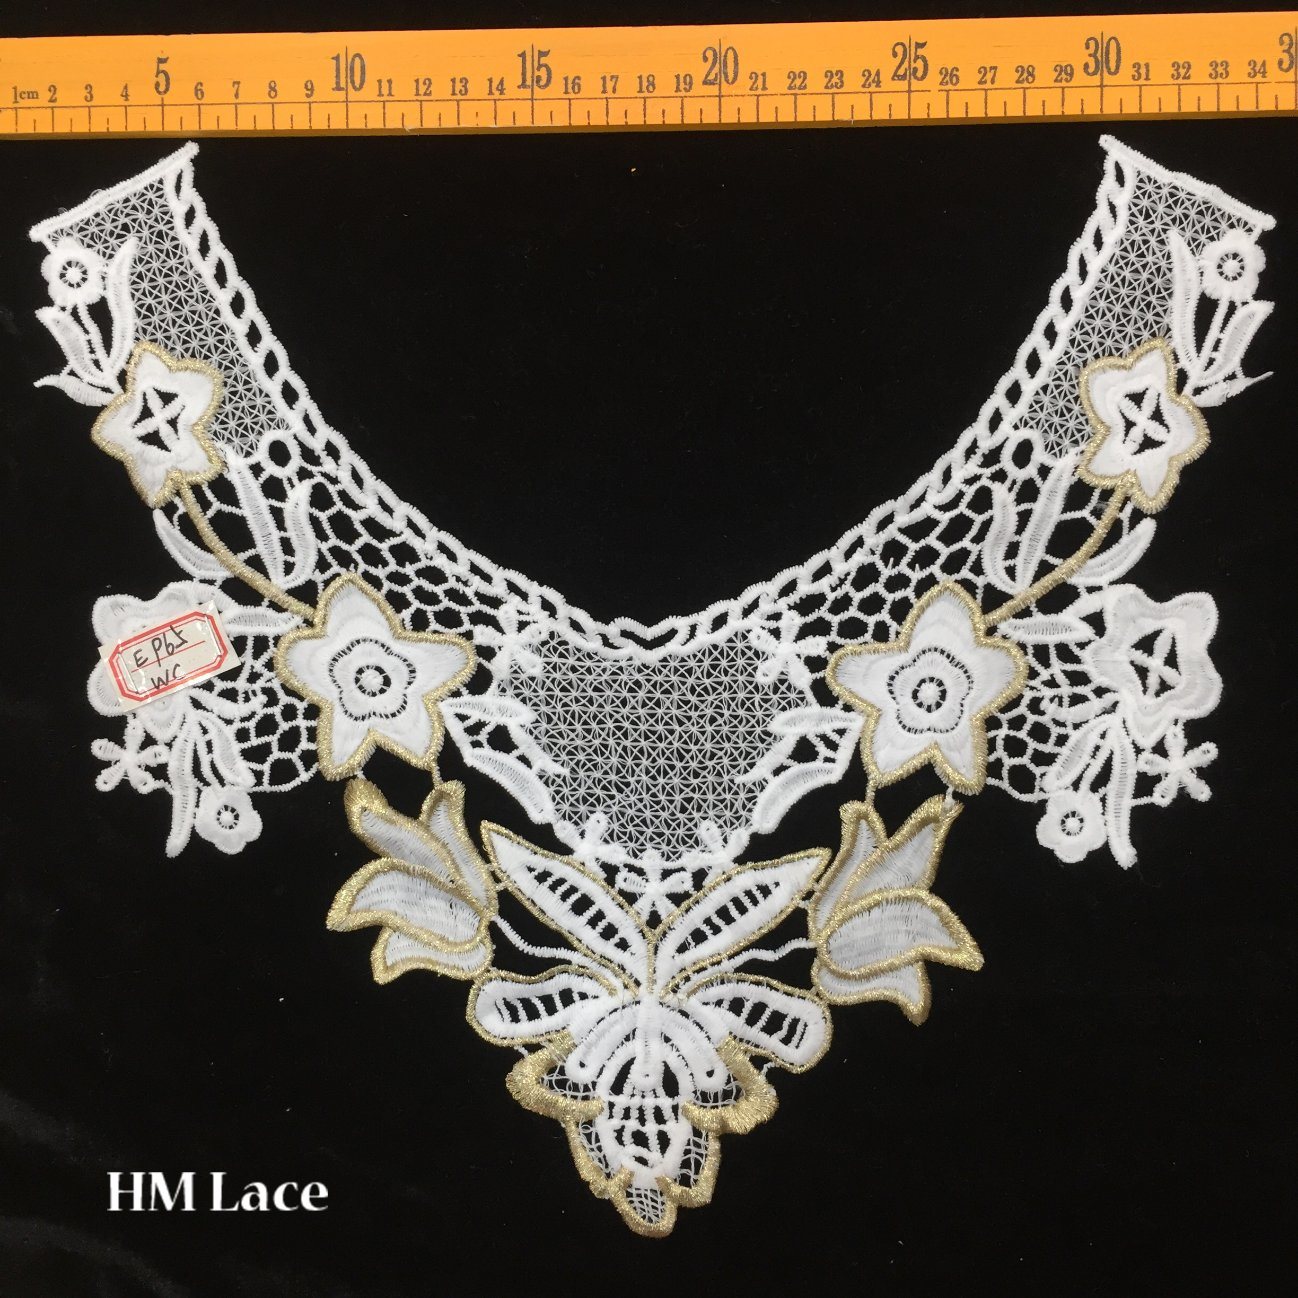 33*28cm Gold Star Flower Neckline Lace Fabric Eyelet Collar Lace Garment Accessories Hme965